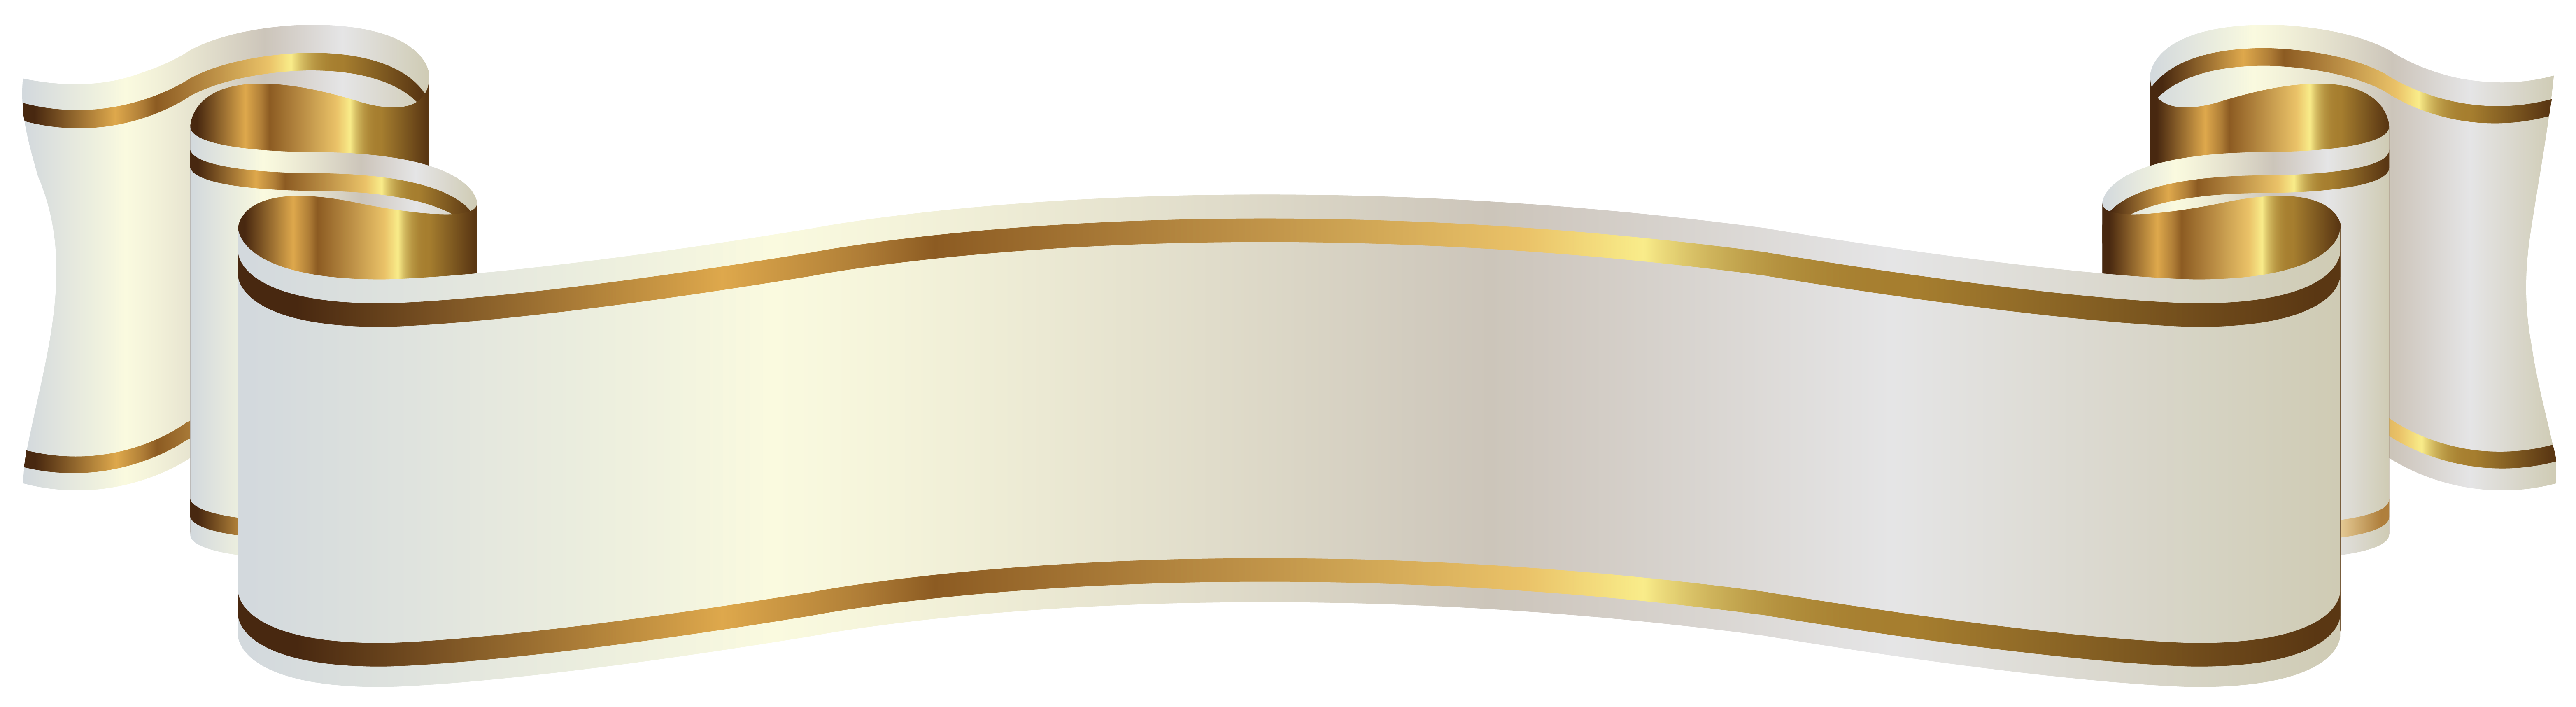 Free Gold Banner Cliparts Download Free Gold Banner Cliparts Png